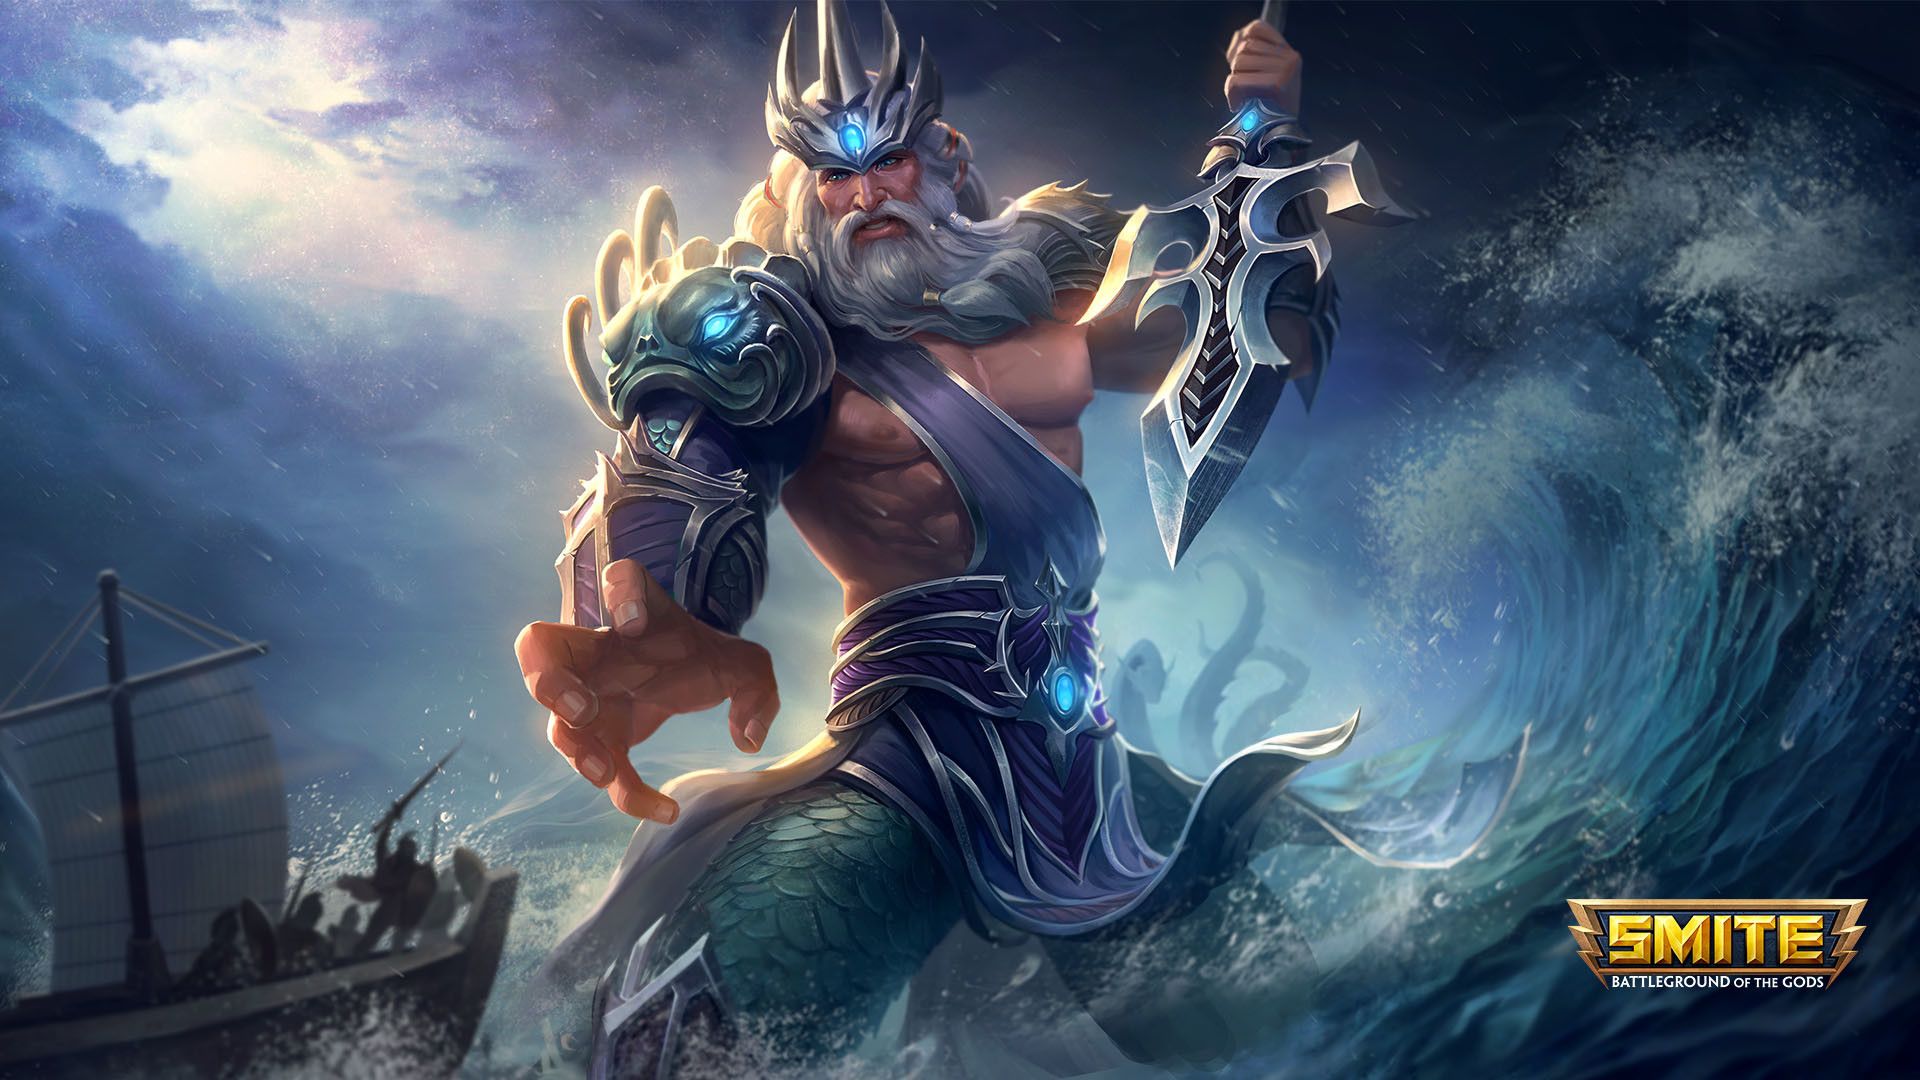 Download Smite wallpapers for mobile phone free Smite HD pictures